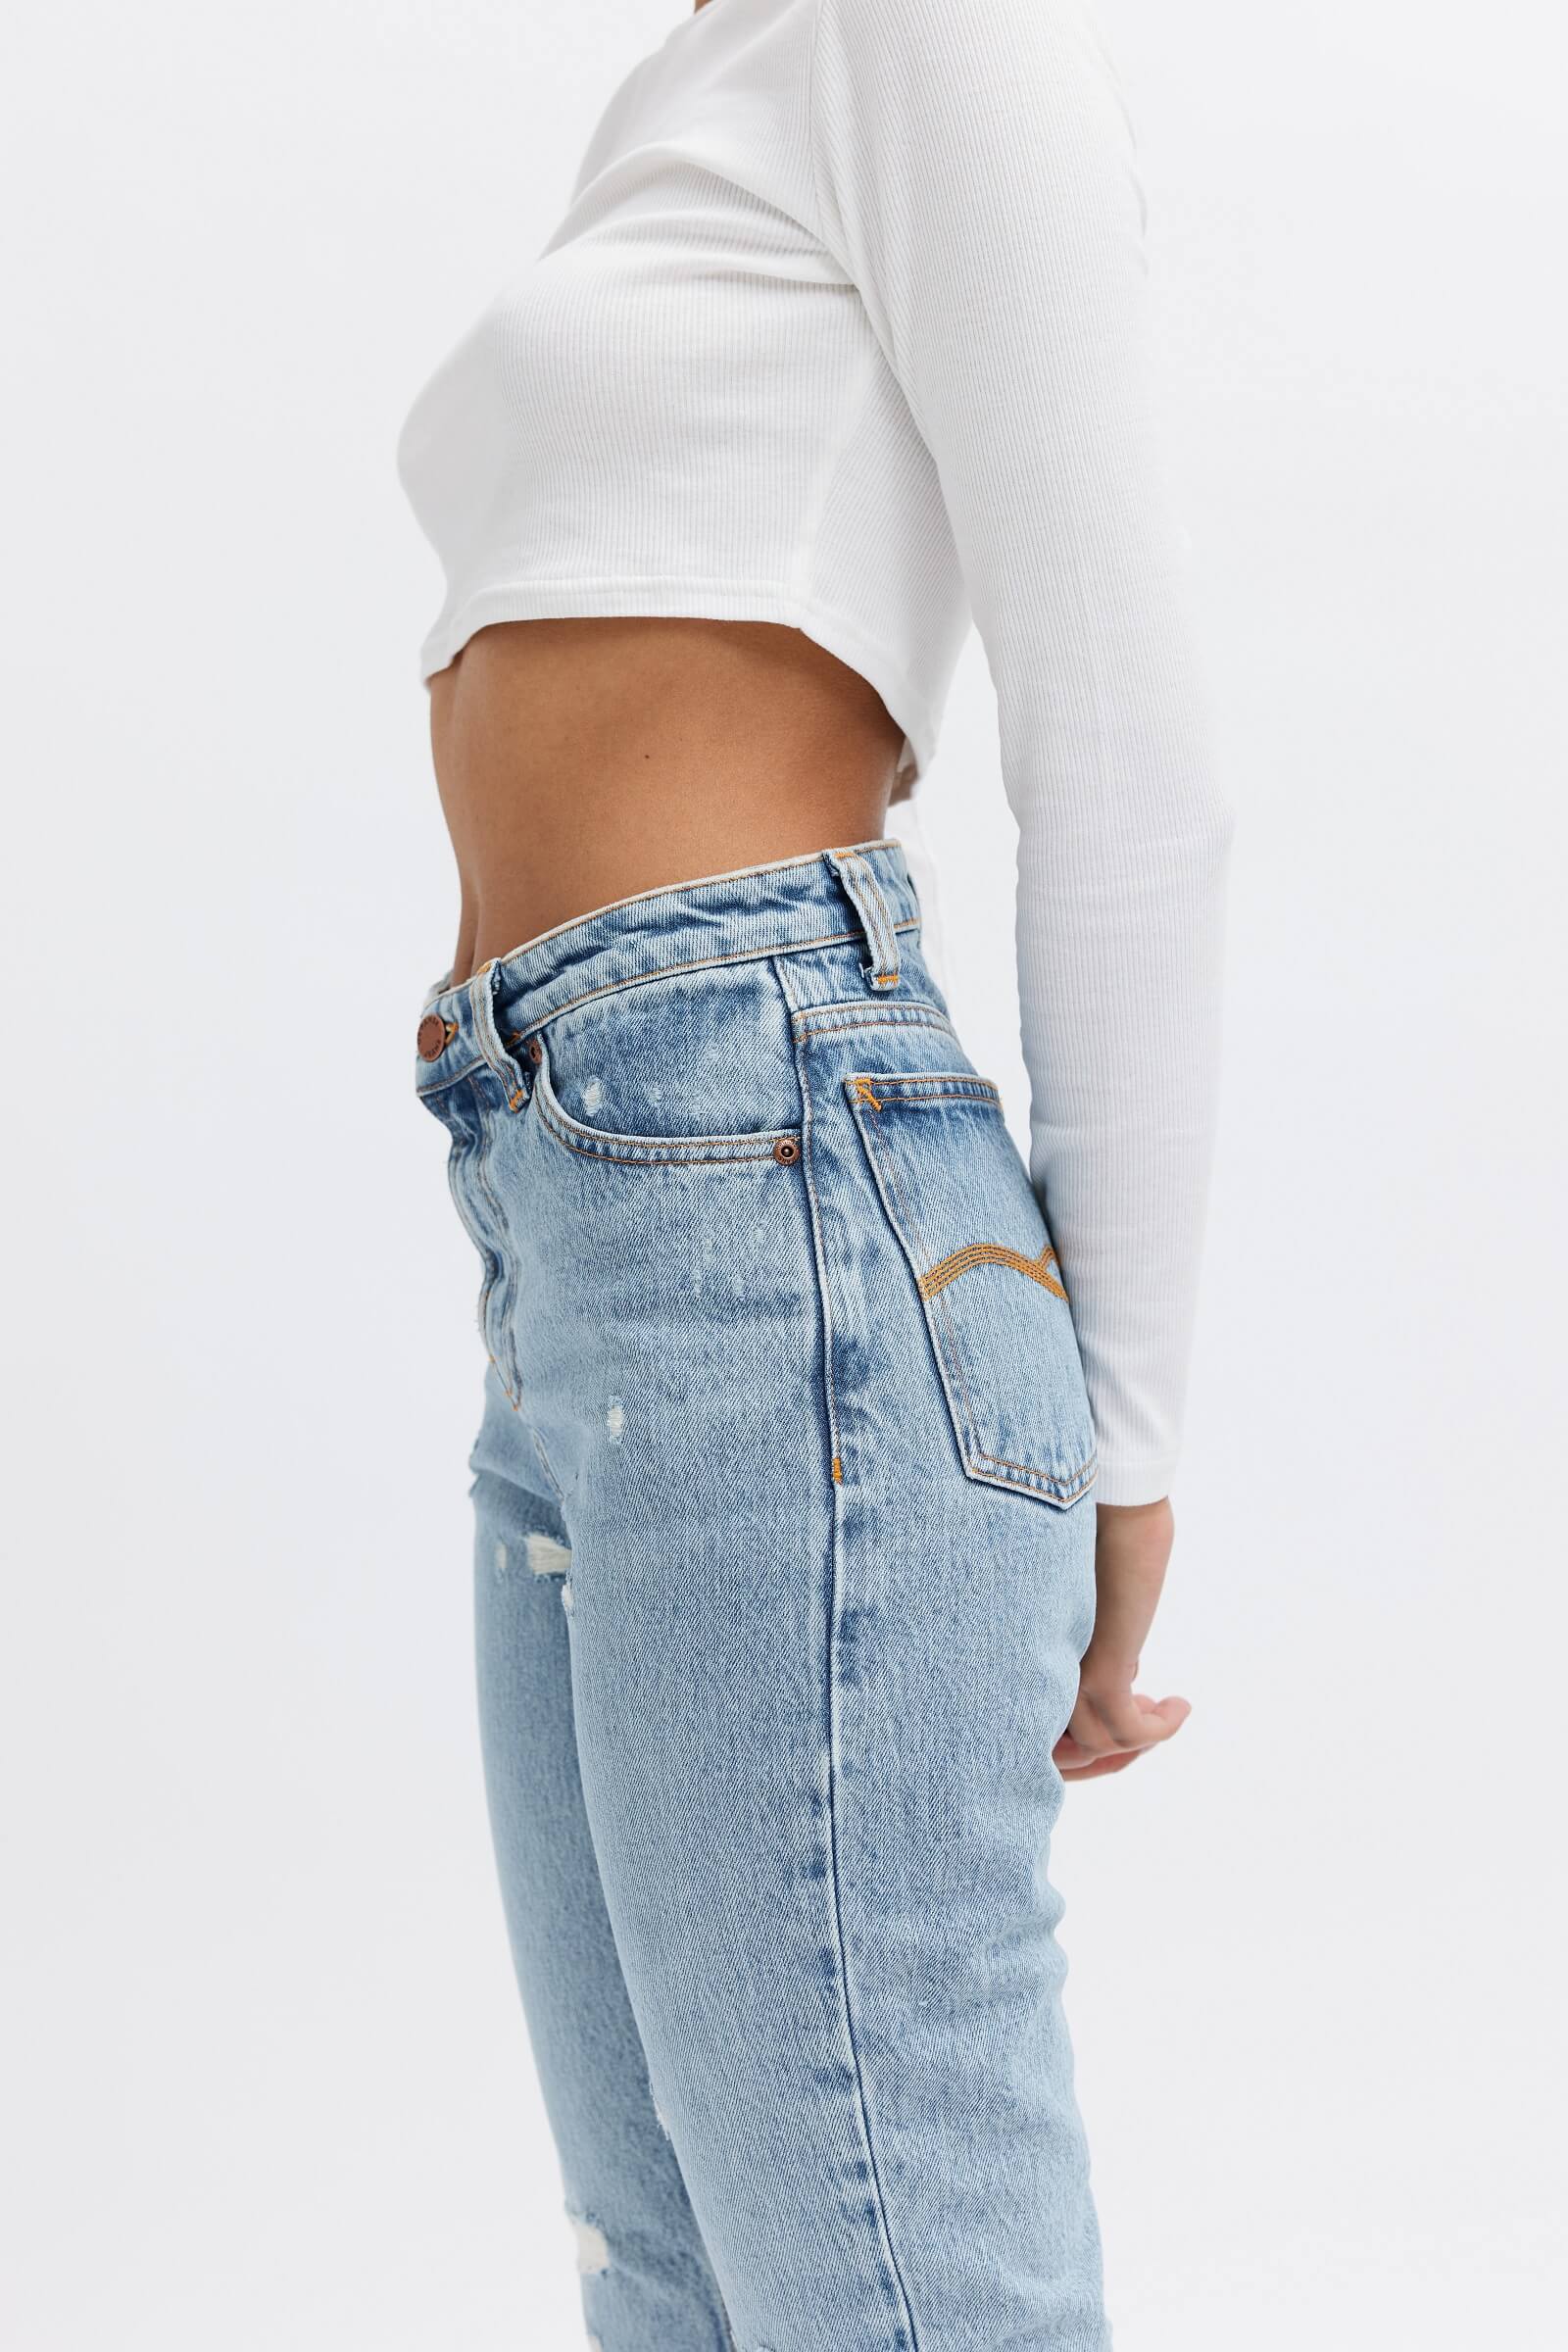 Ripped Jeans for women - Organic and Recycled cotton - Circular Denim Fashion